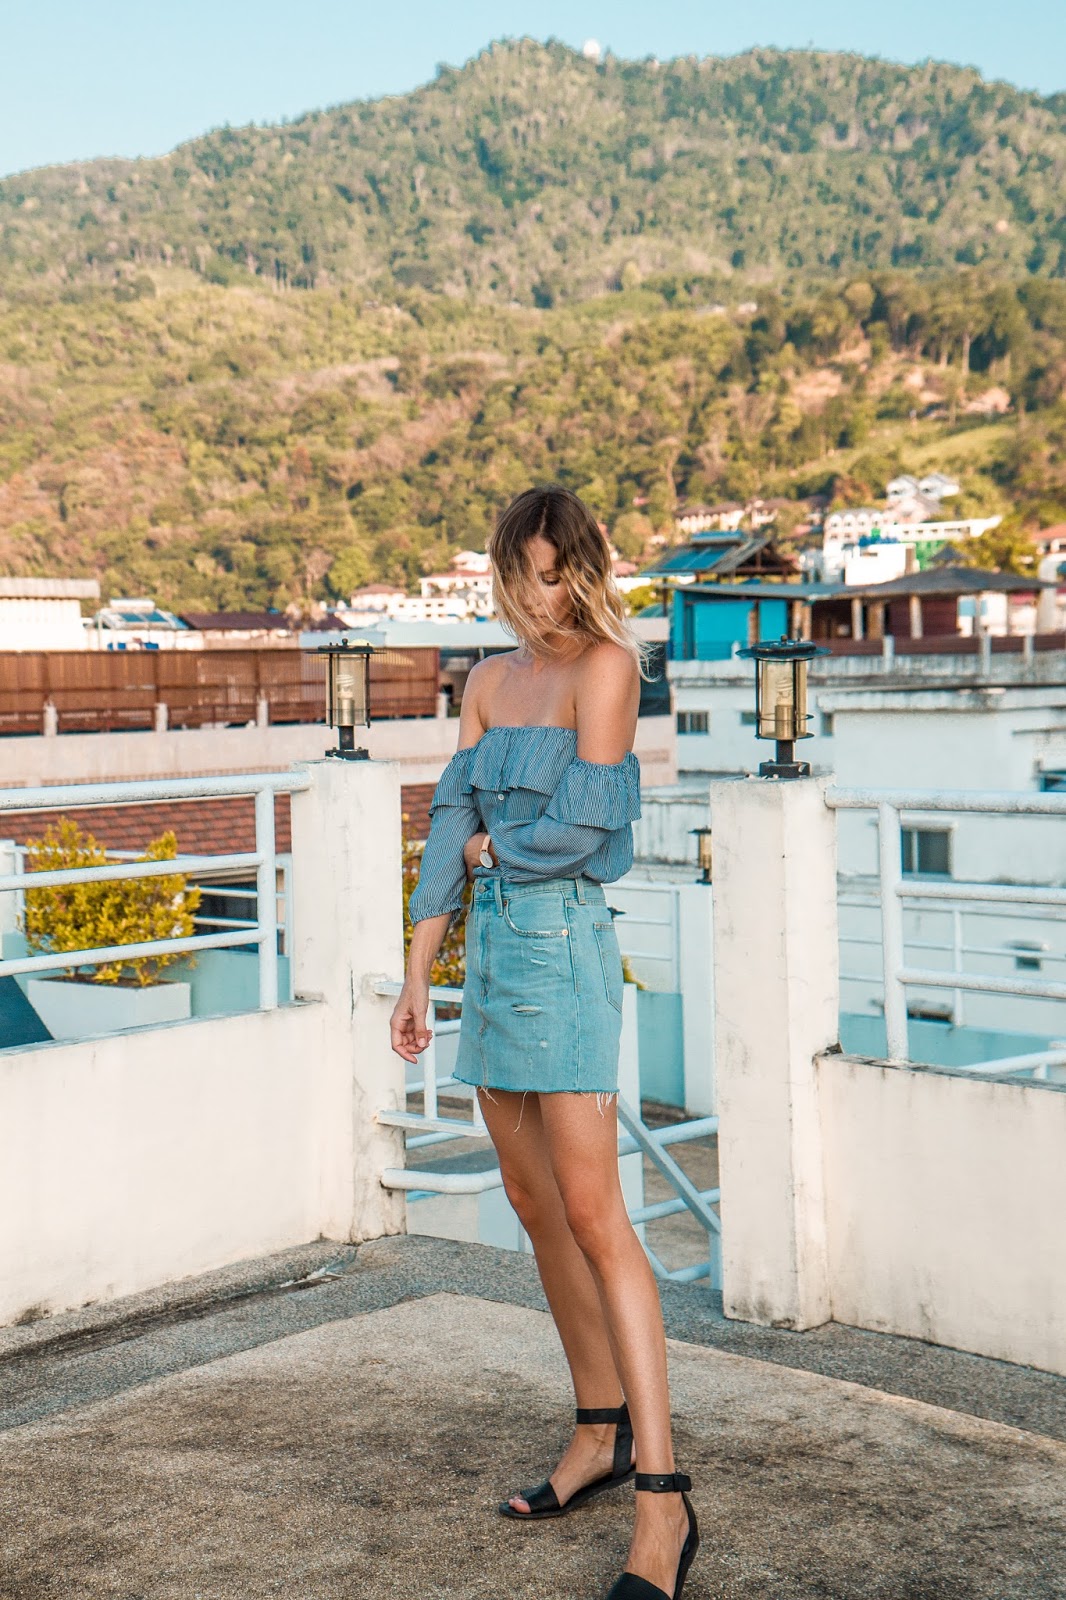 fashion and travel blogger, Alison Hutchinson, in Phuket Thailand, wearing a Faithfull the Brand off the shoulder top and Levi's deconstructed denim skirt